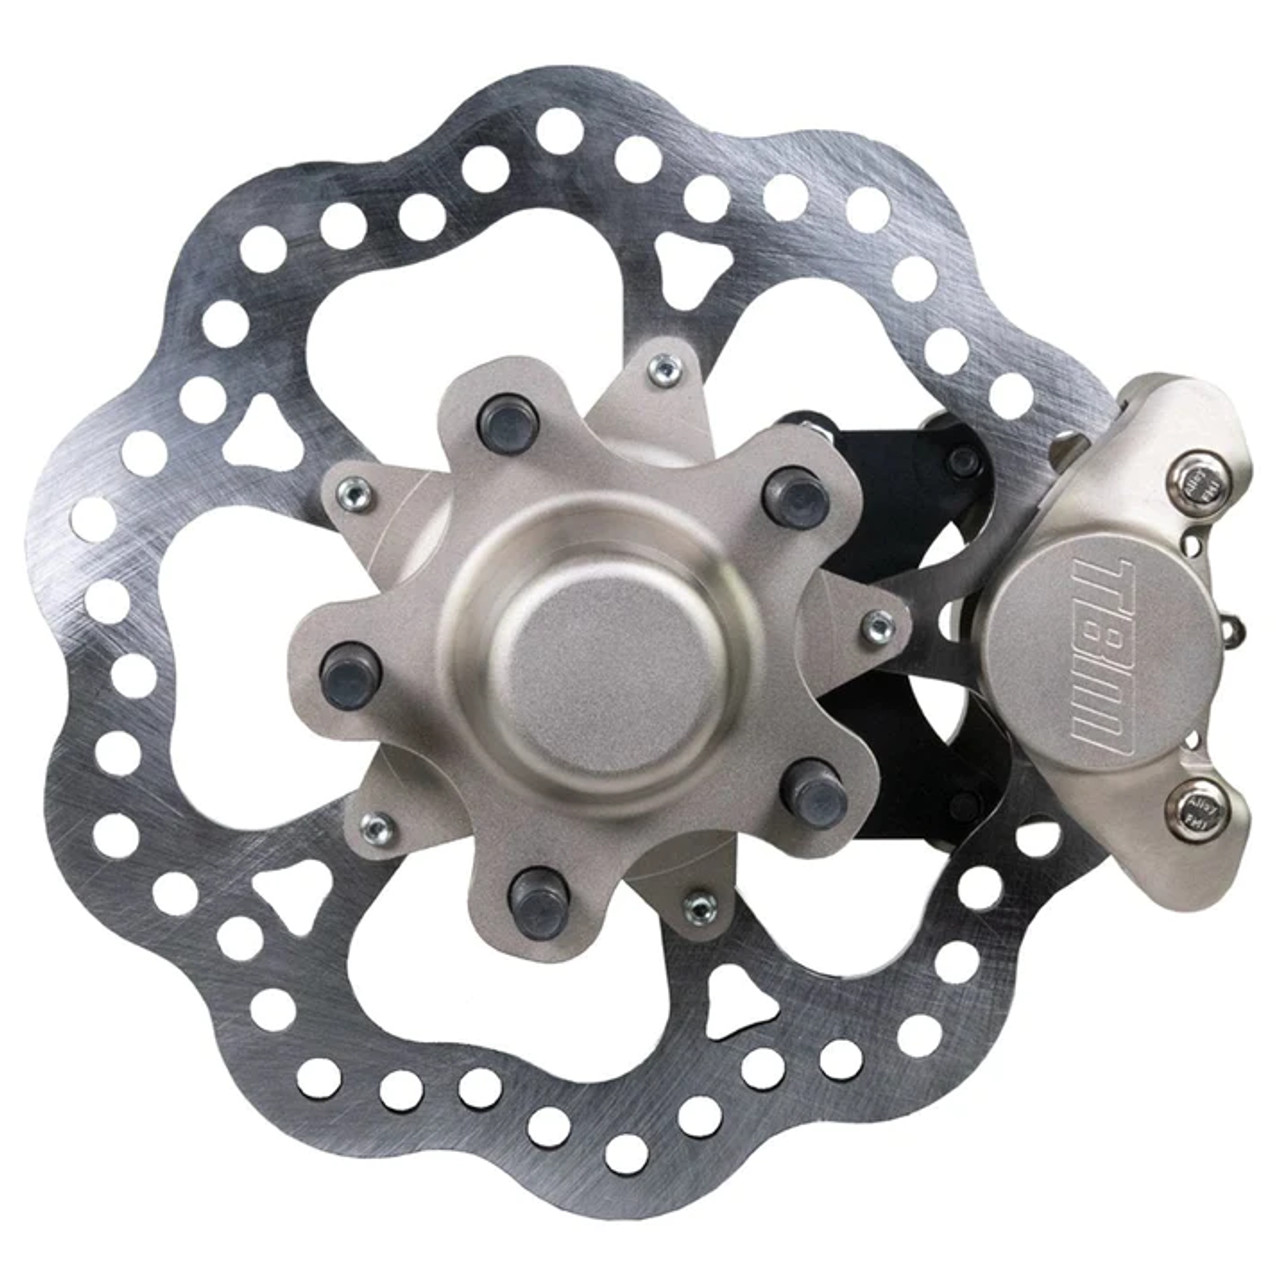 64-69 Buick Special Front Drag Racing Brakes Disc/Drum Spindle (w/ New Aluminum Hub) 001-0233